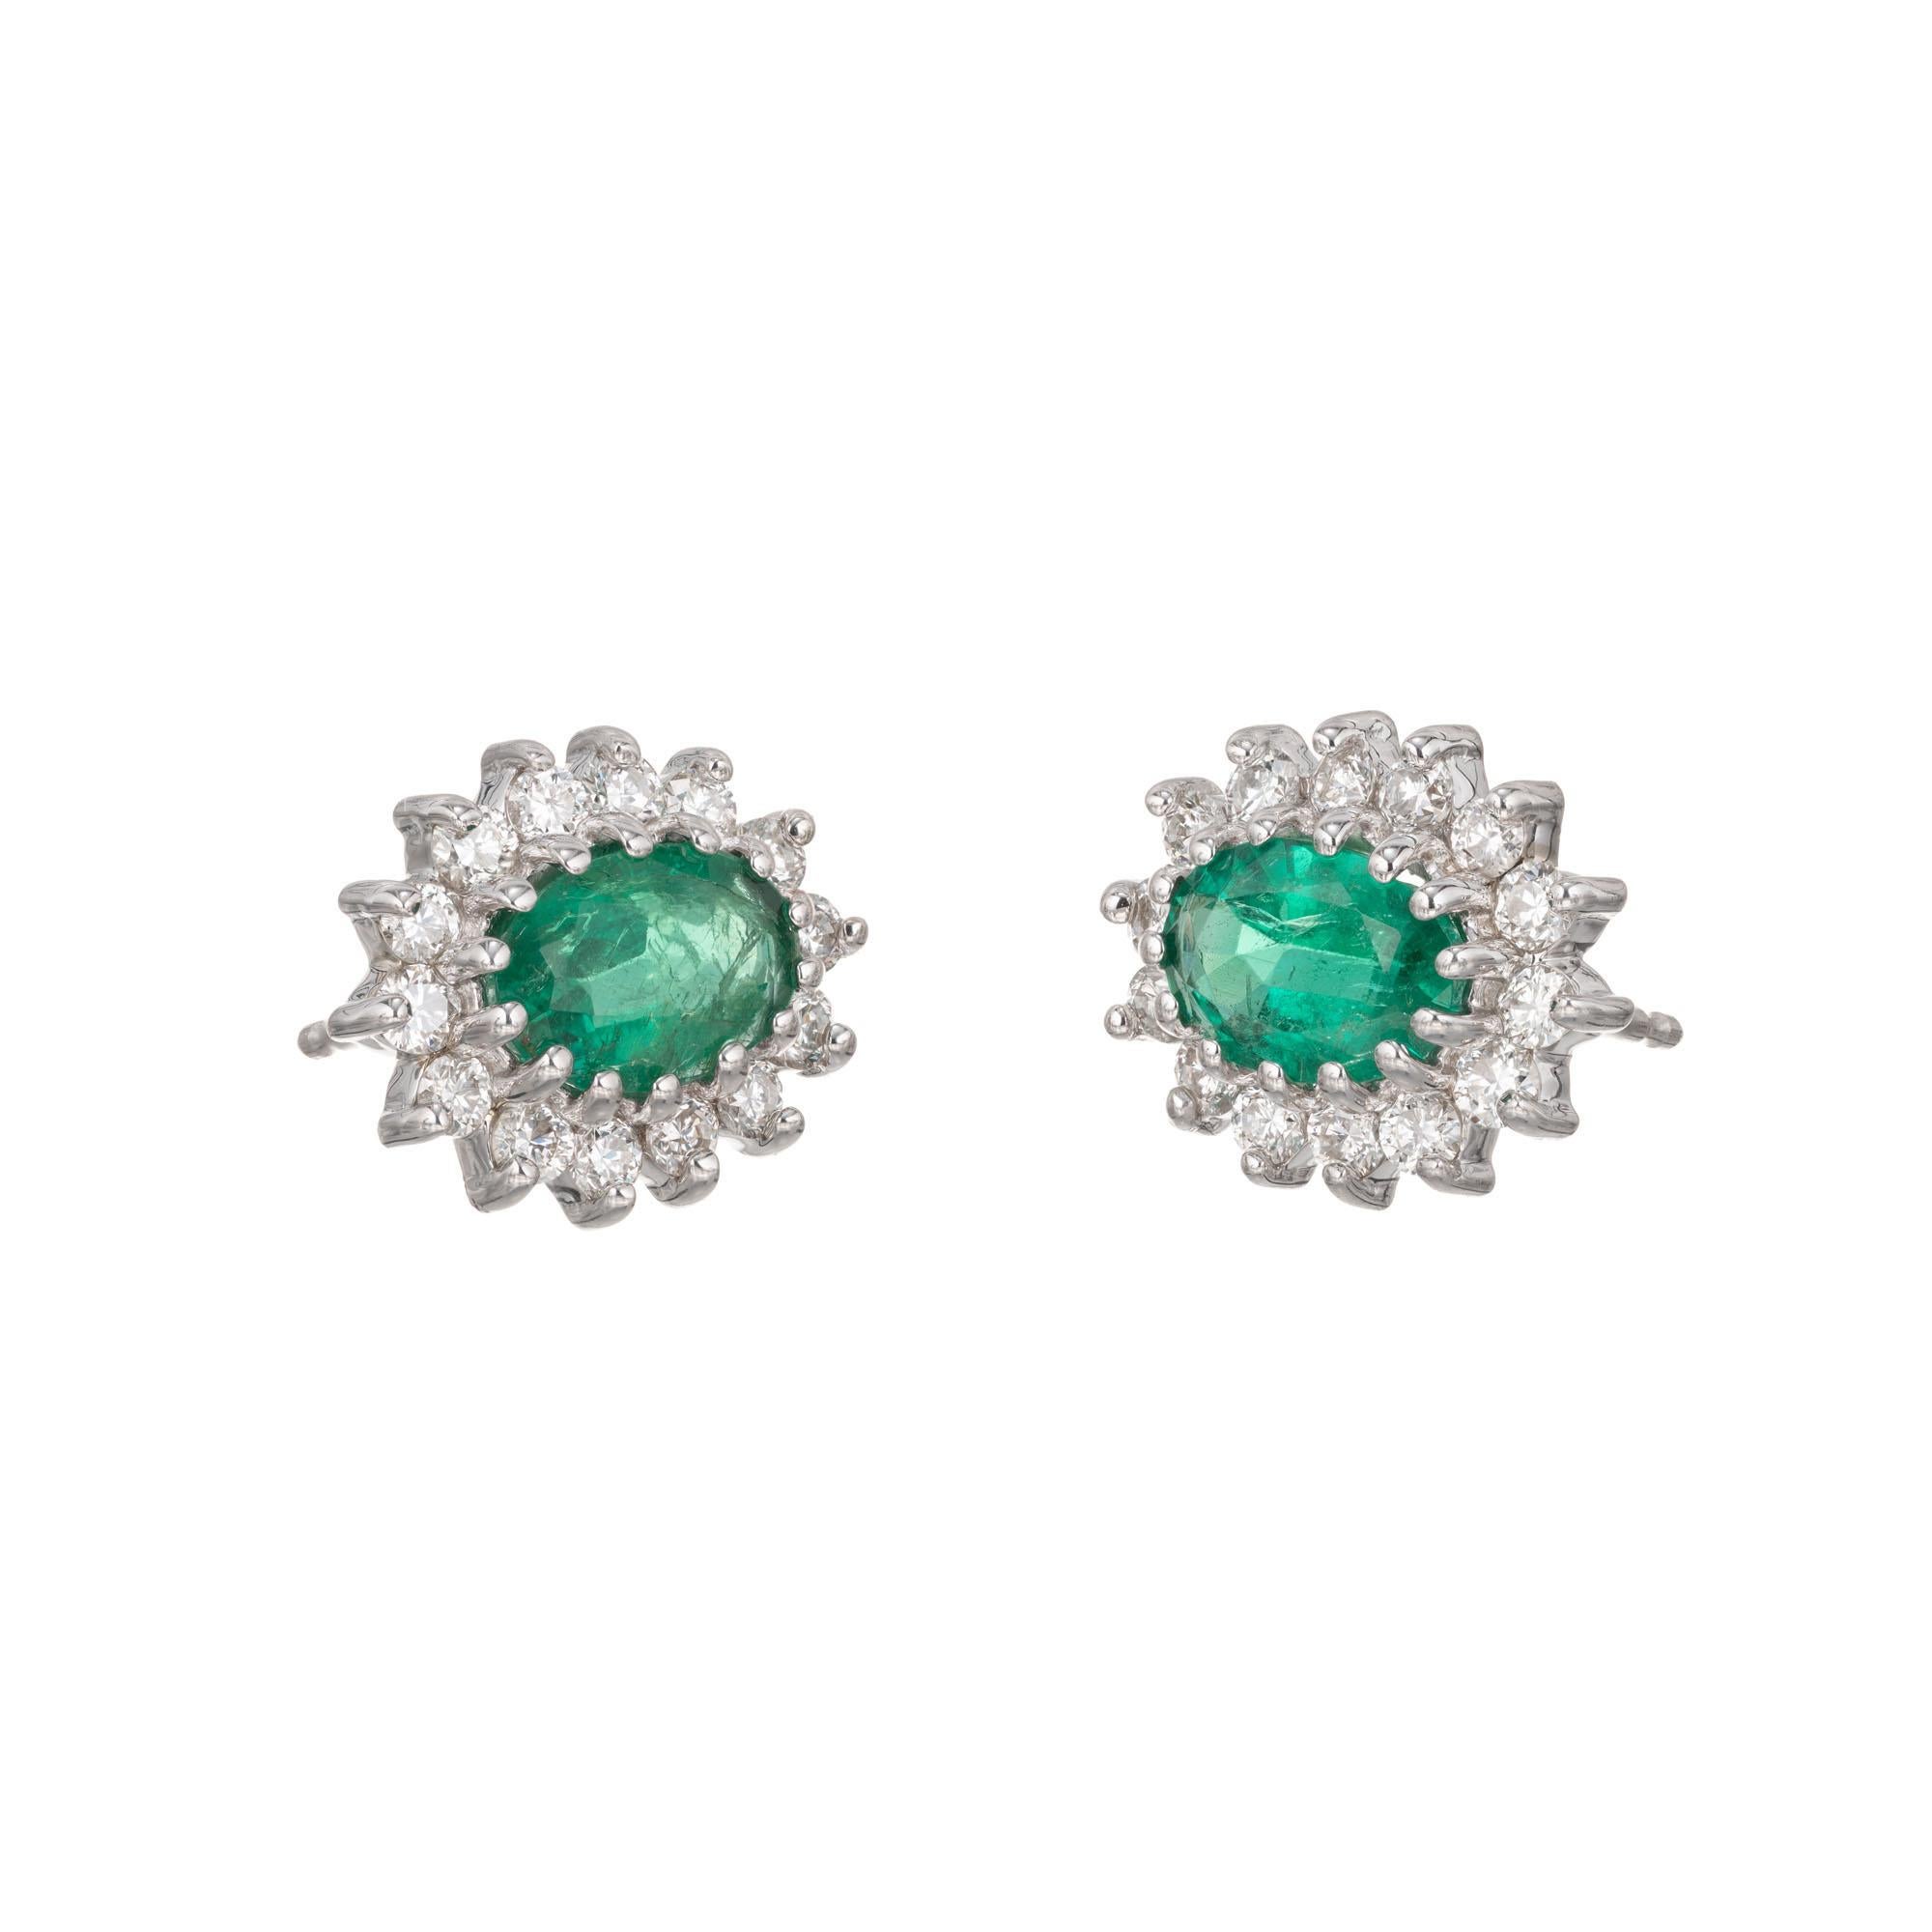 Green oval emeralds with a halo of round full cut diamonds, in 18k white gold. 

28 round full cut diamonds, approx. total weight .56cts, G, VS
2 oval top fine bright gem green oval Emeralds 7 x 5mm, approx. total weight 1.75cts
18k White